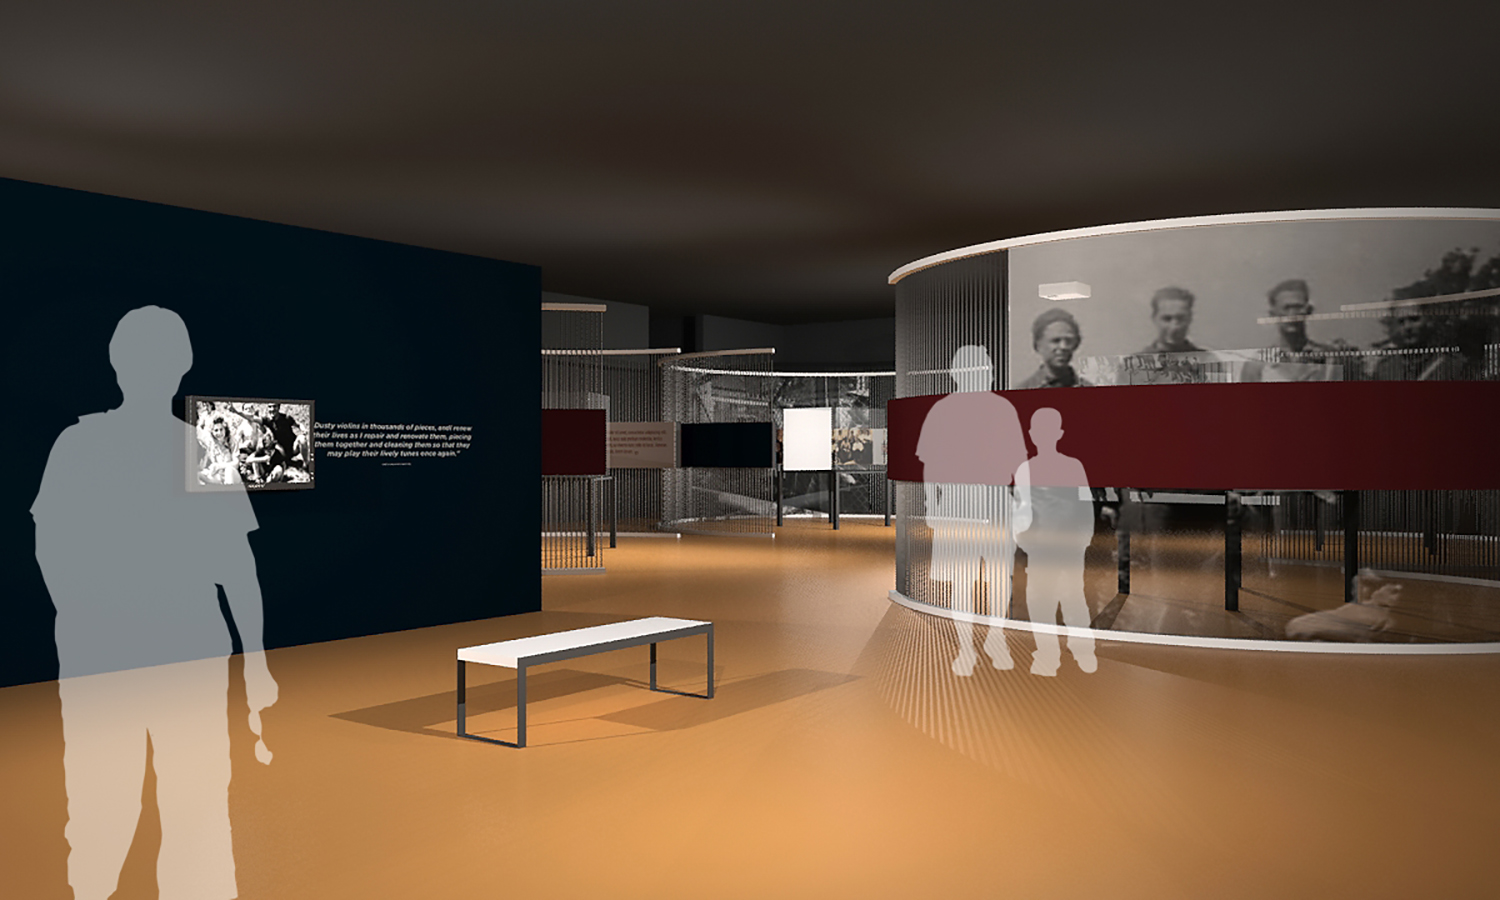 Violins of Hope exhibition rendering courtesy of Gallagher & Associates and the Maltz Museum of Jewish Heritage